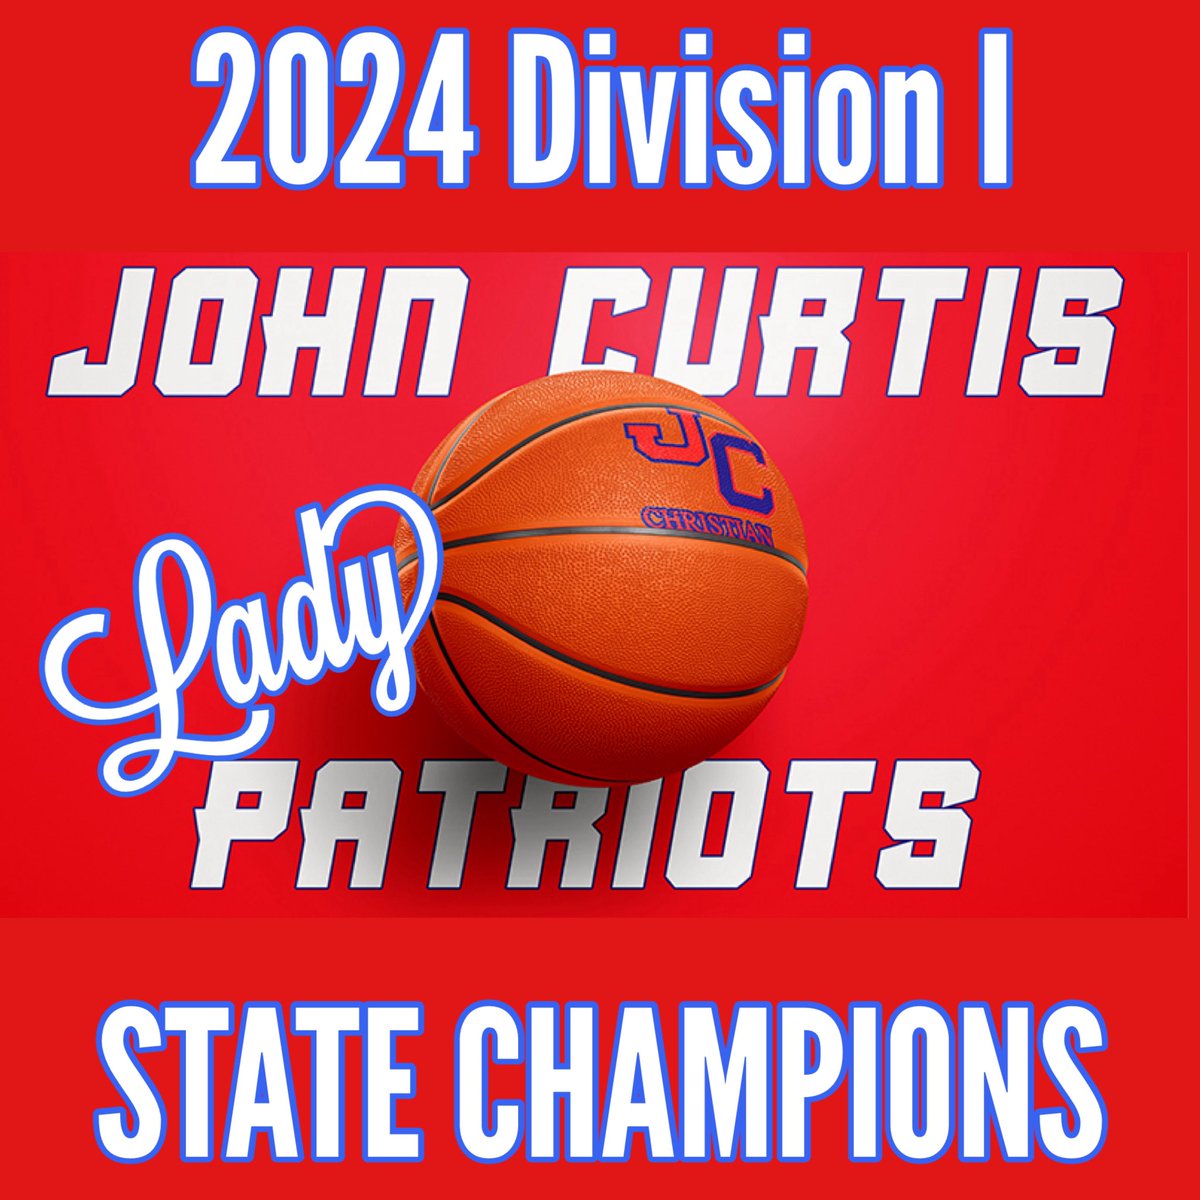 For the 7th time in 8 years, the John Curtis girls are CHAMPIONS! @CurtisFootball1